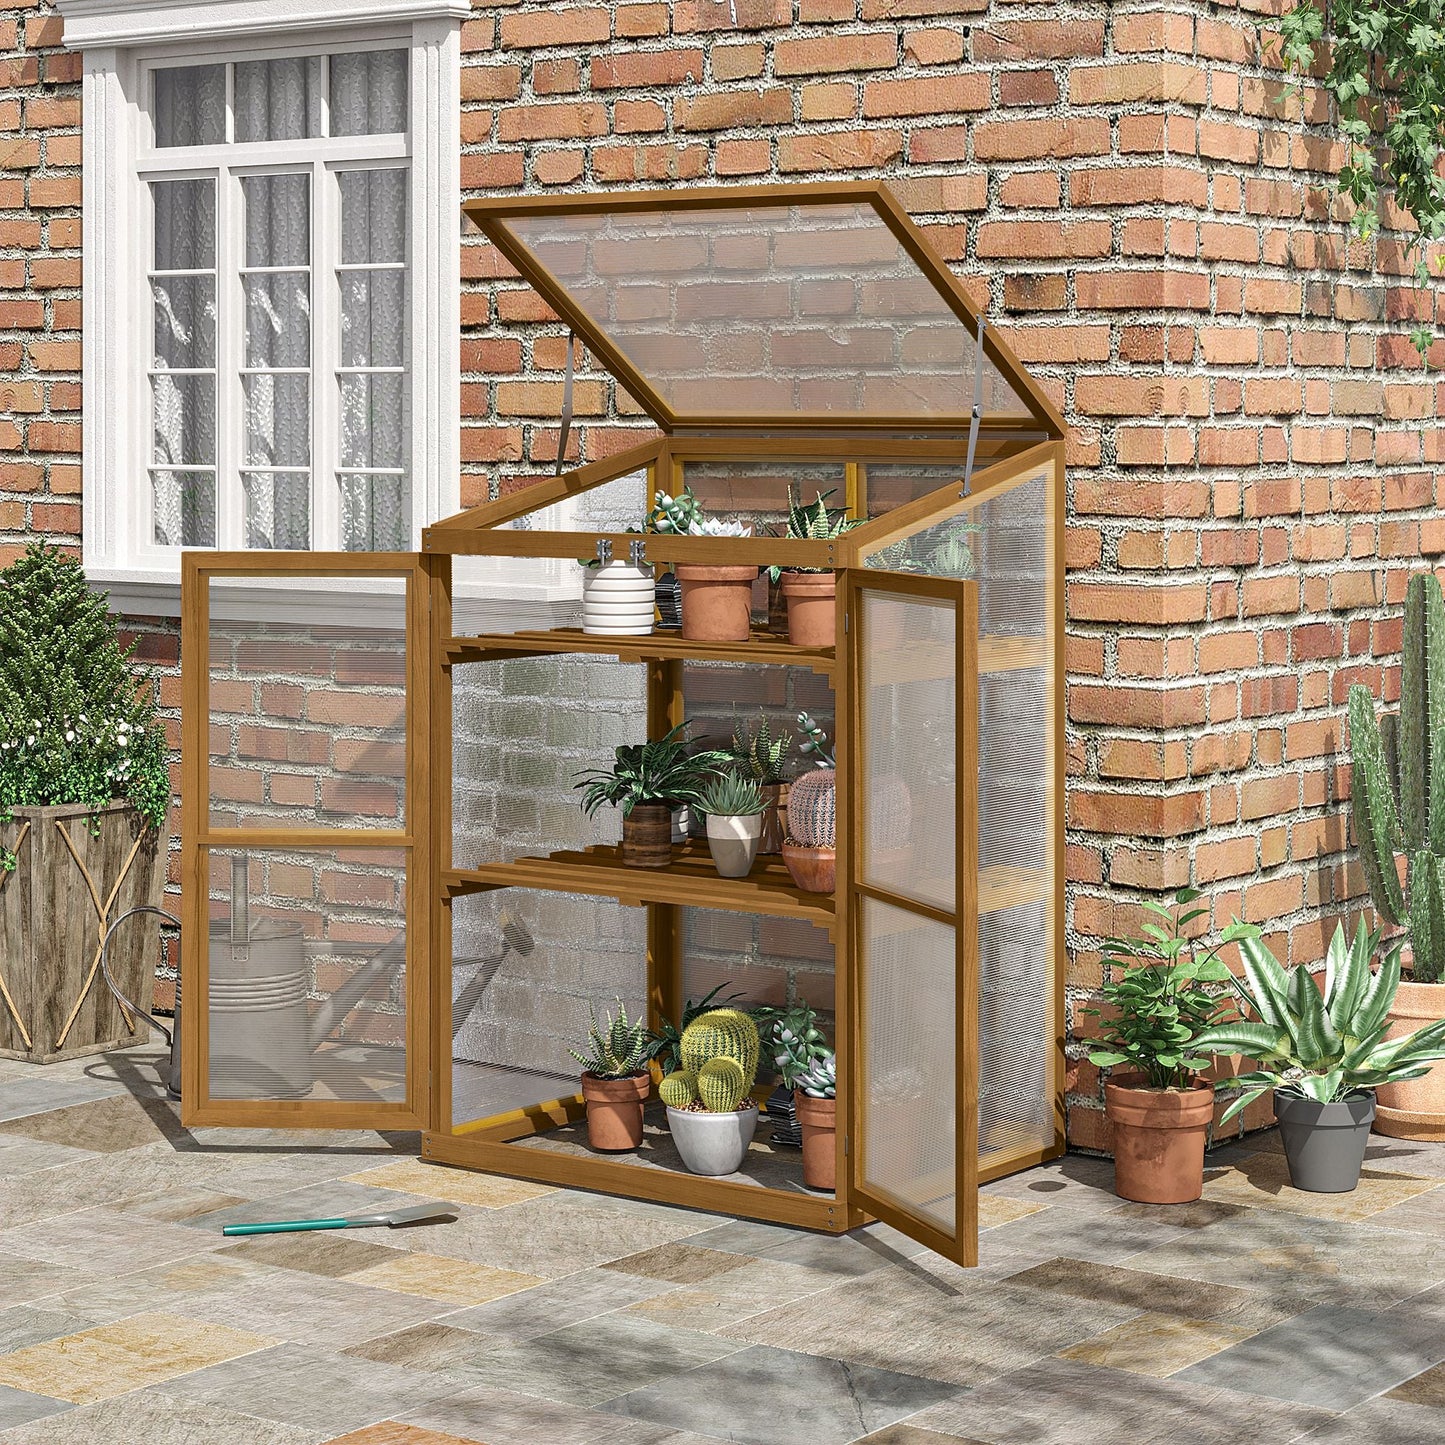 Miscellaneous-Wooden Cold Frame Greenhouse Small Mini Planter Box, 30" L x 24" W x 44" H, Brown - Outdoor Style Company